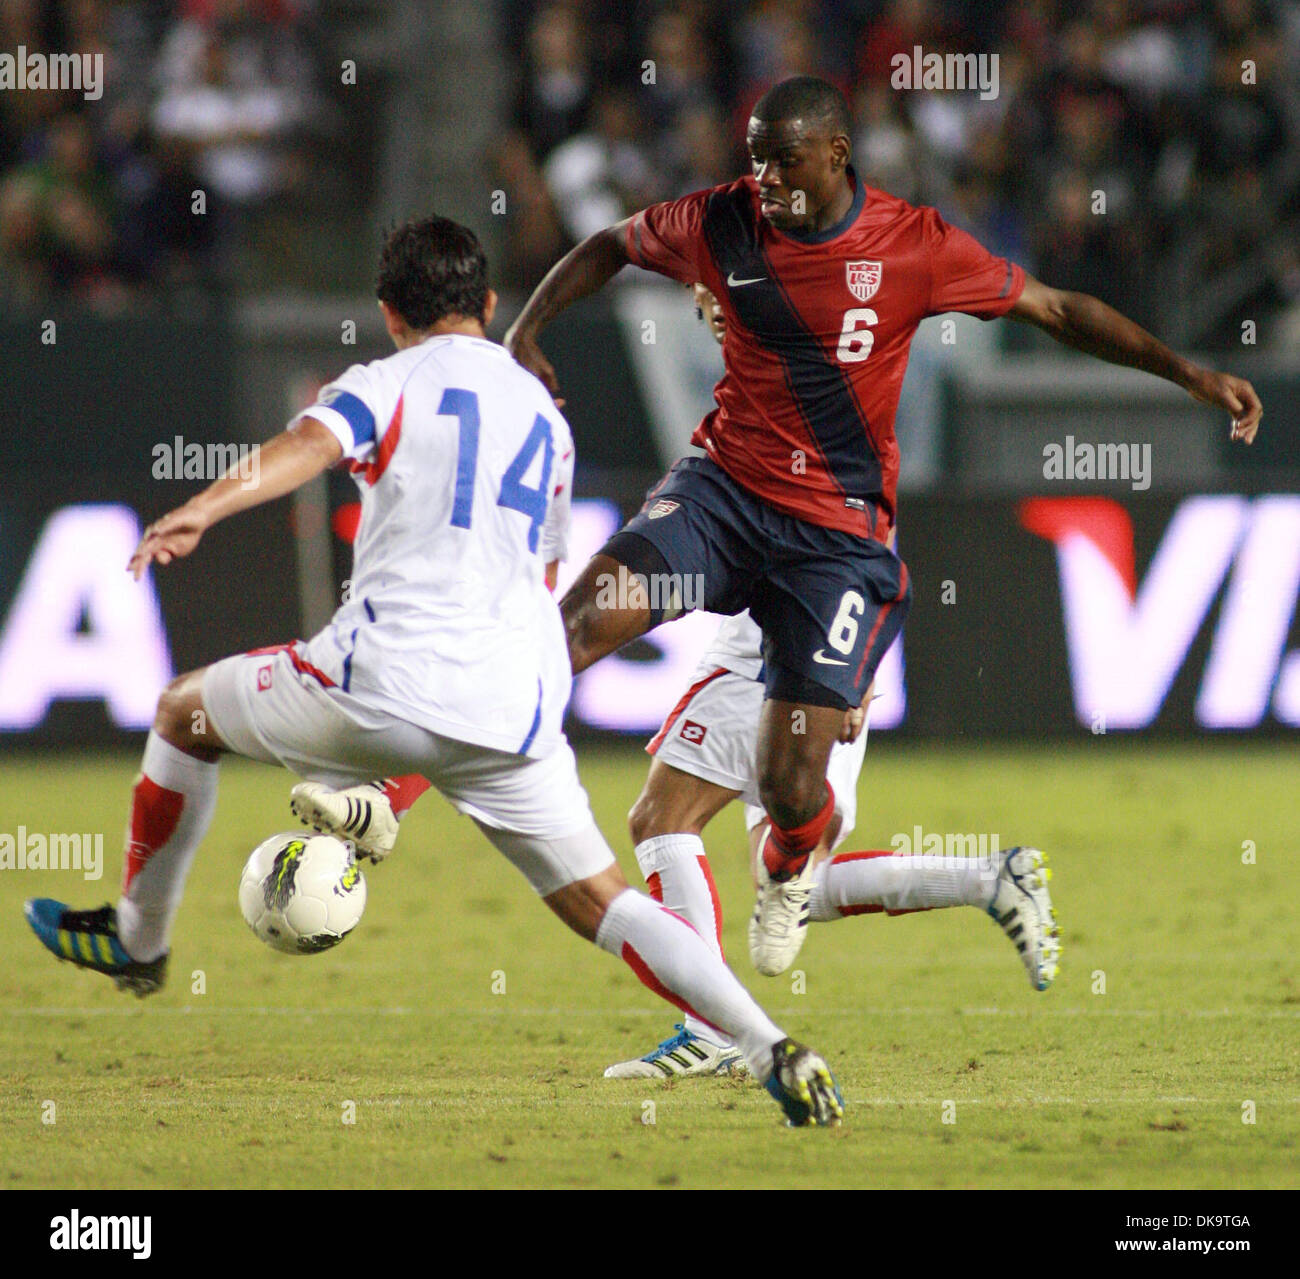 Sep. 2, 2011 - Los Angeles, California, U.S. - United States' MAURICE EDU, #6, and Costa Rica's RANDALL AZOFEIFA, #14, battle for the ball during the friendly soccer match at The Home Depot Center. Costa Rica defeated the United States, 1-0. (Credit Image: © Ringo Chiu/ZUMAPRESS.com) Stock Photo